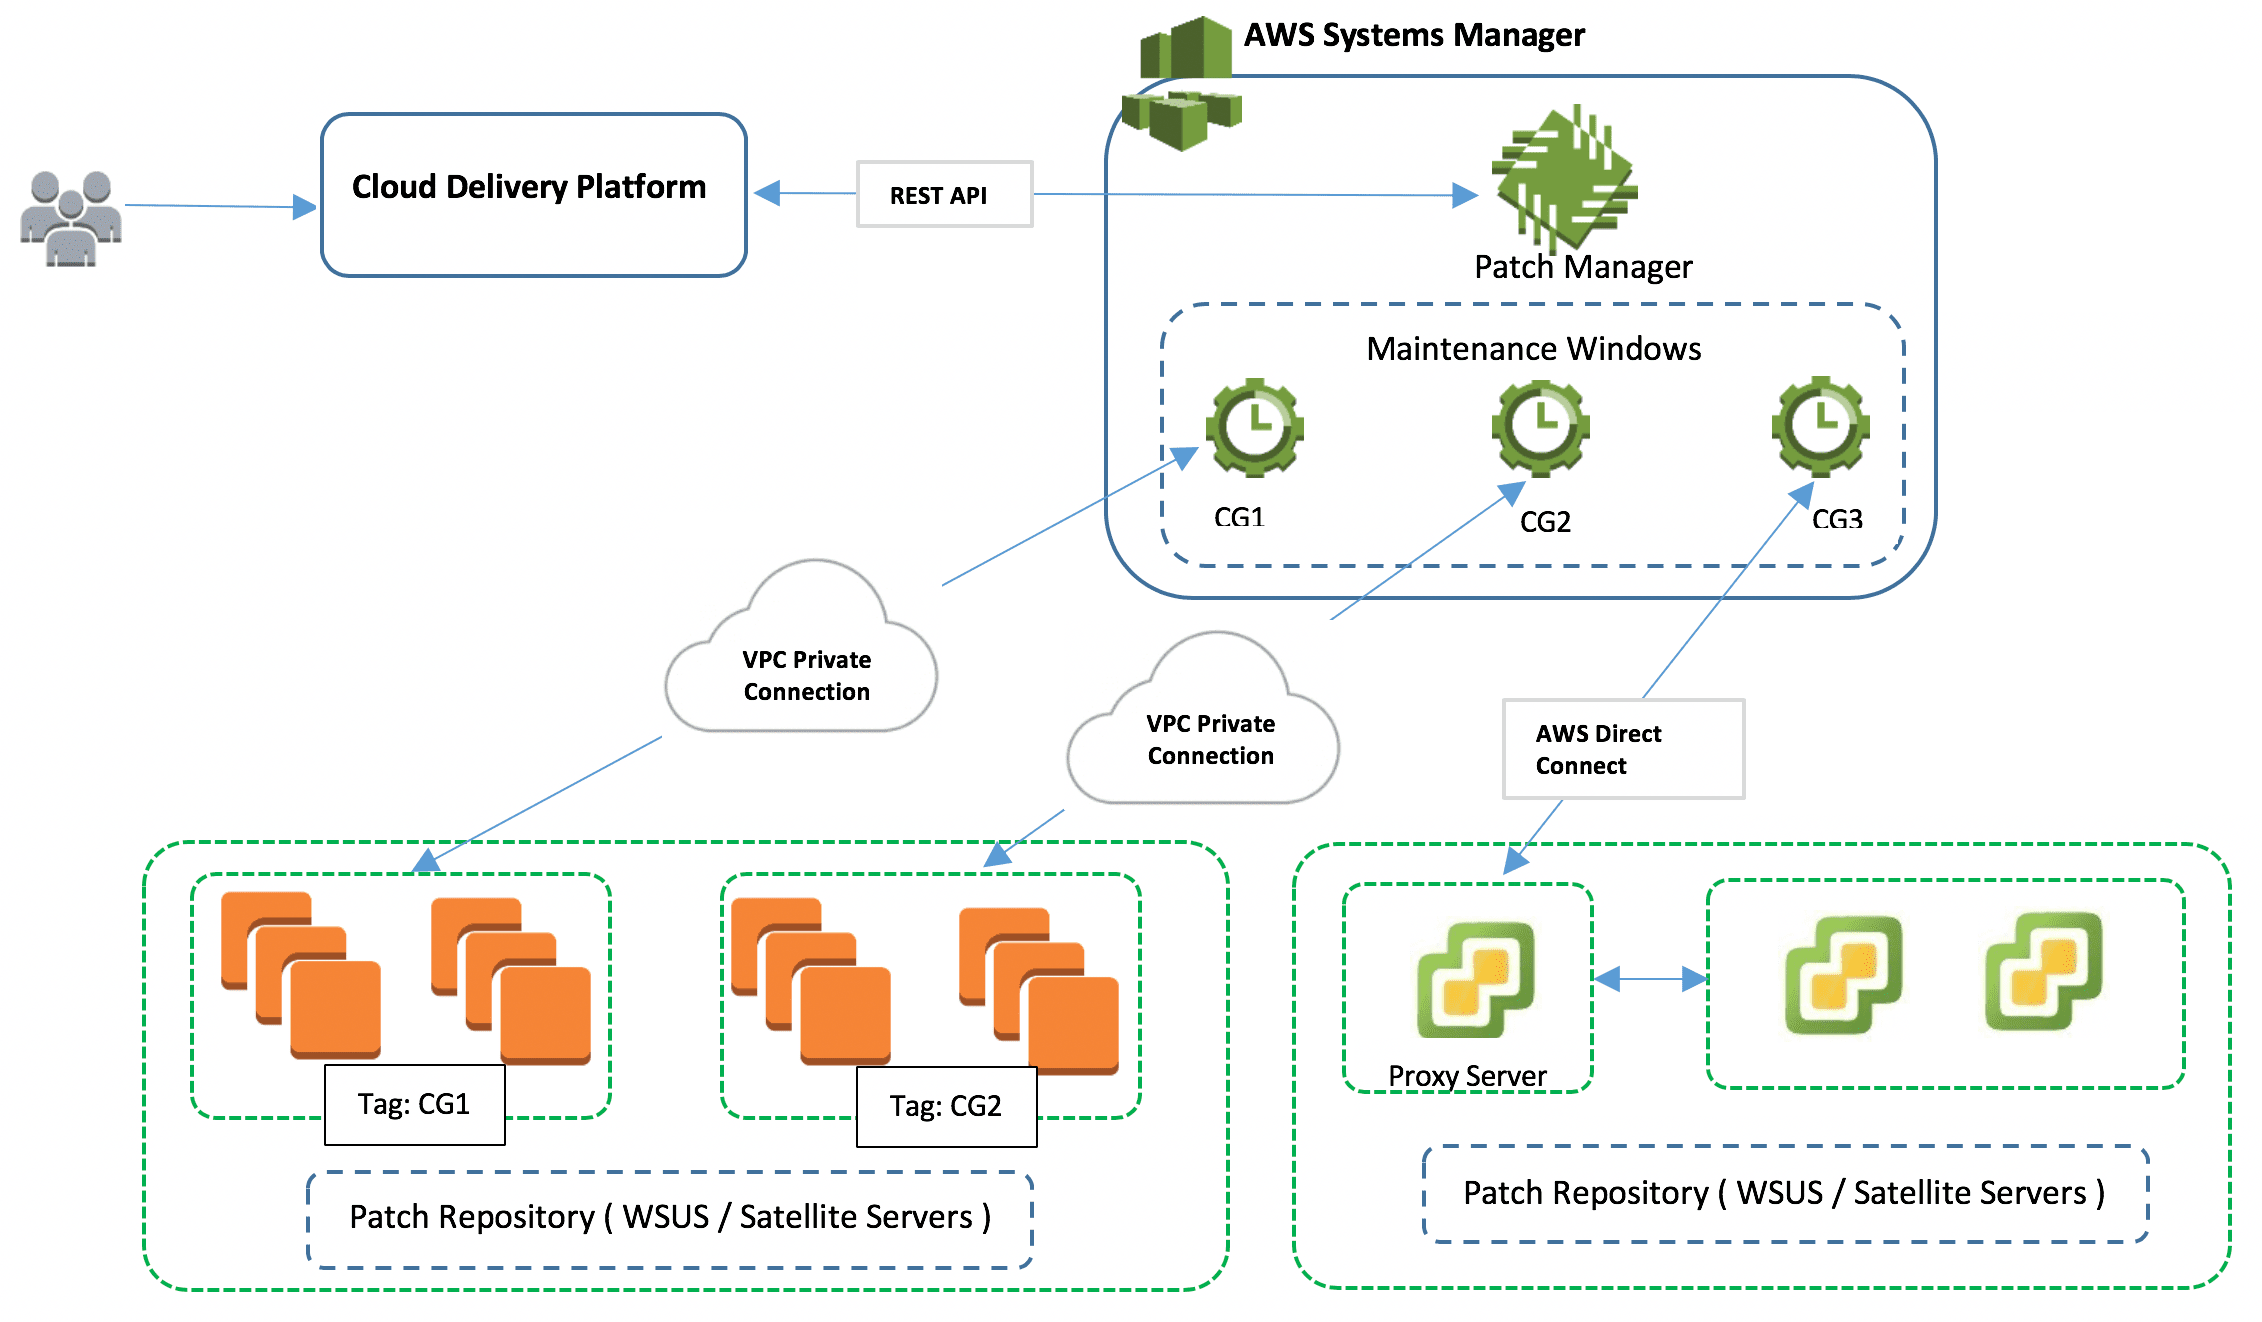 aws_system_manager